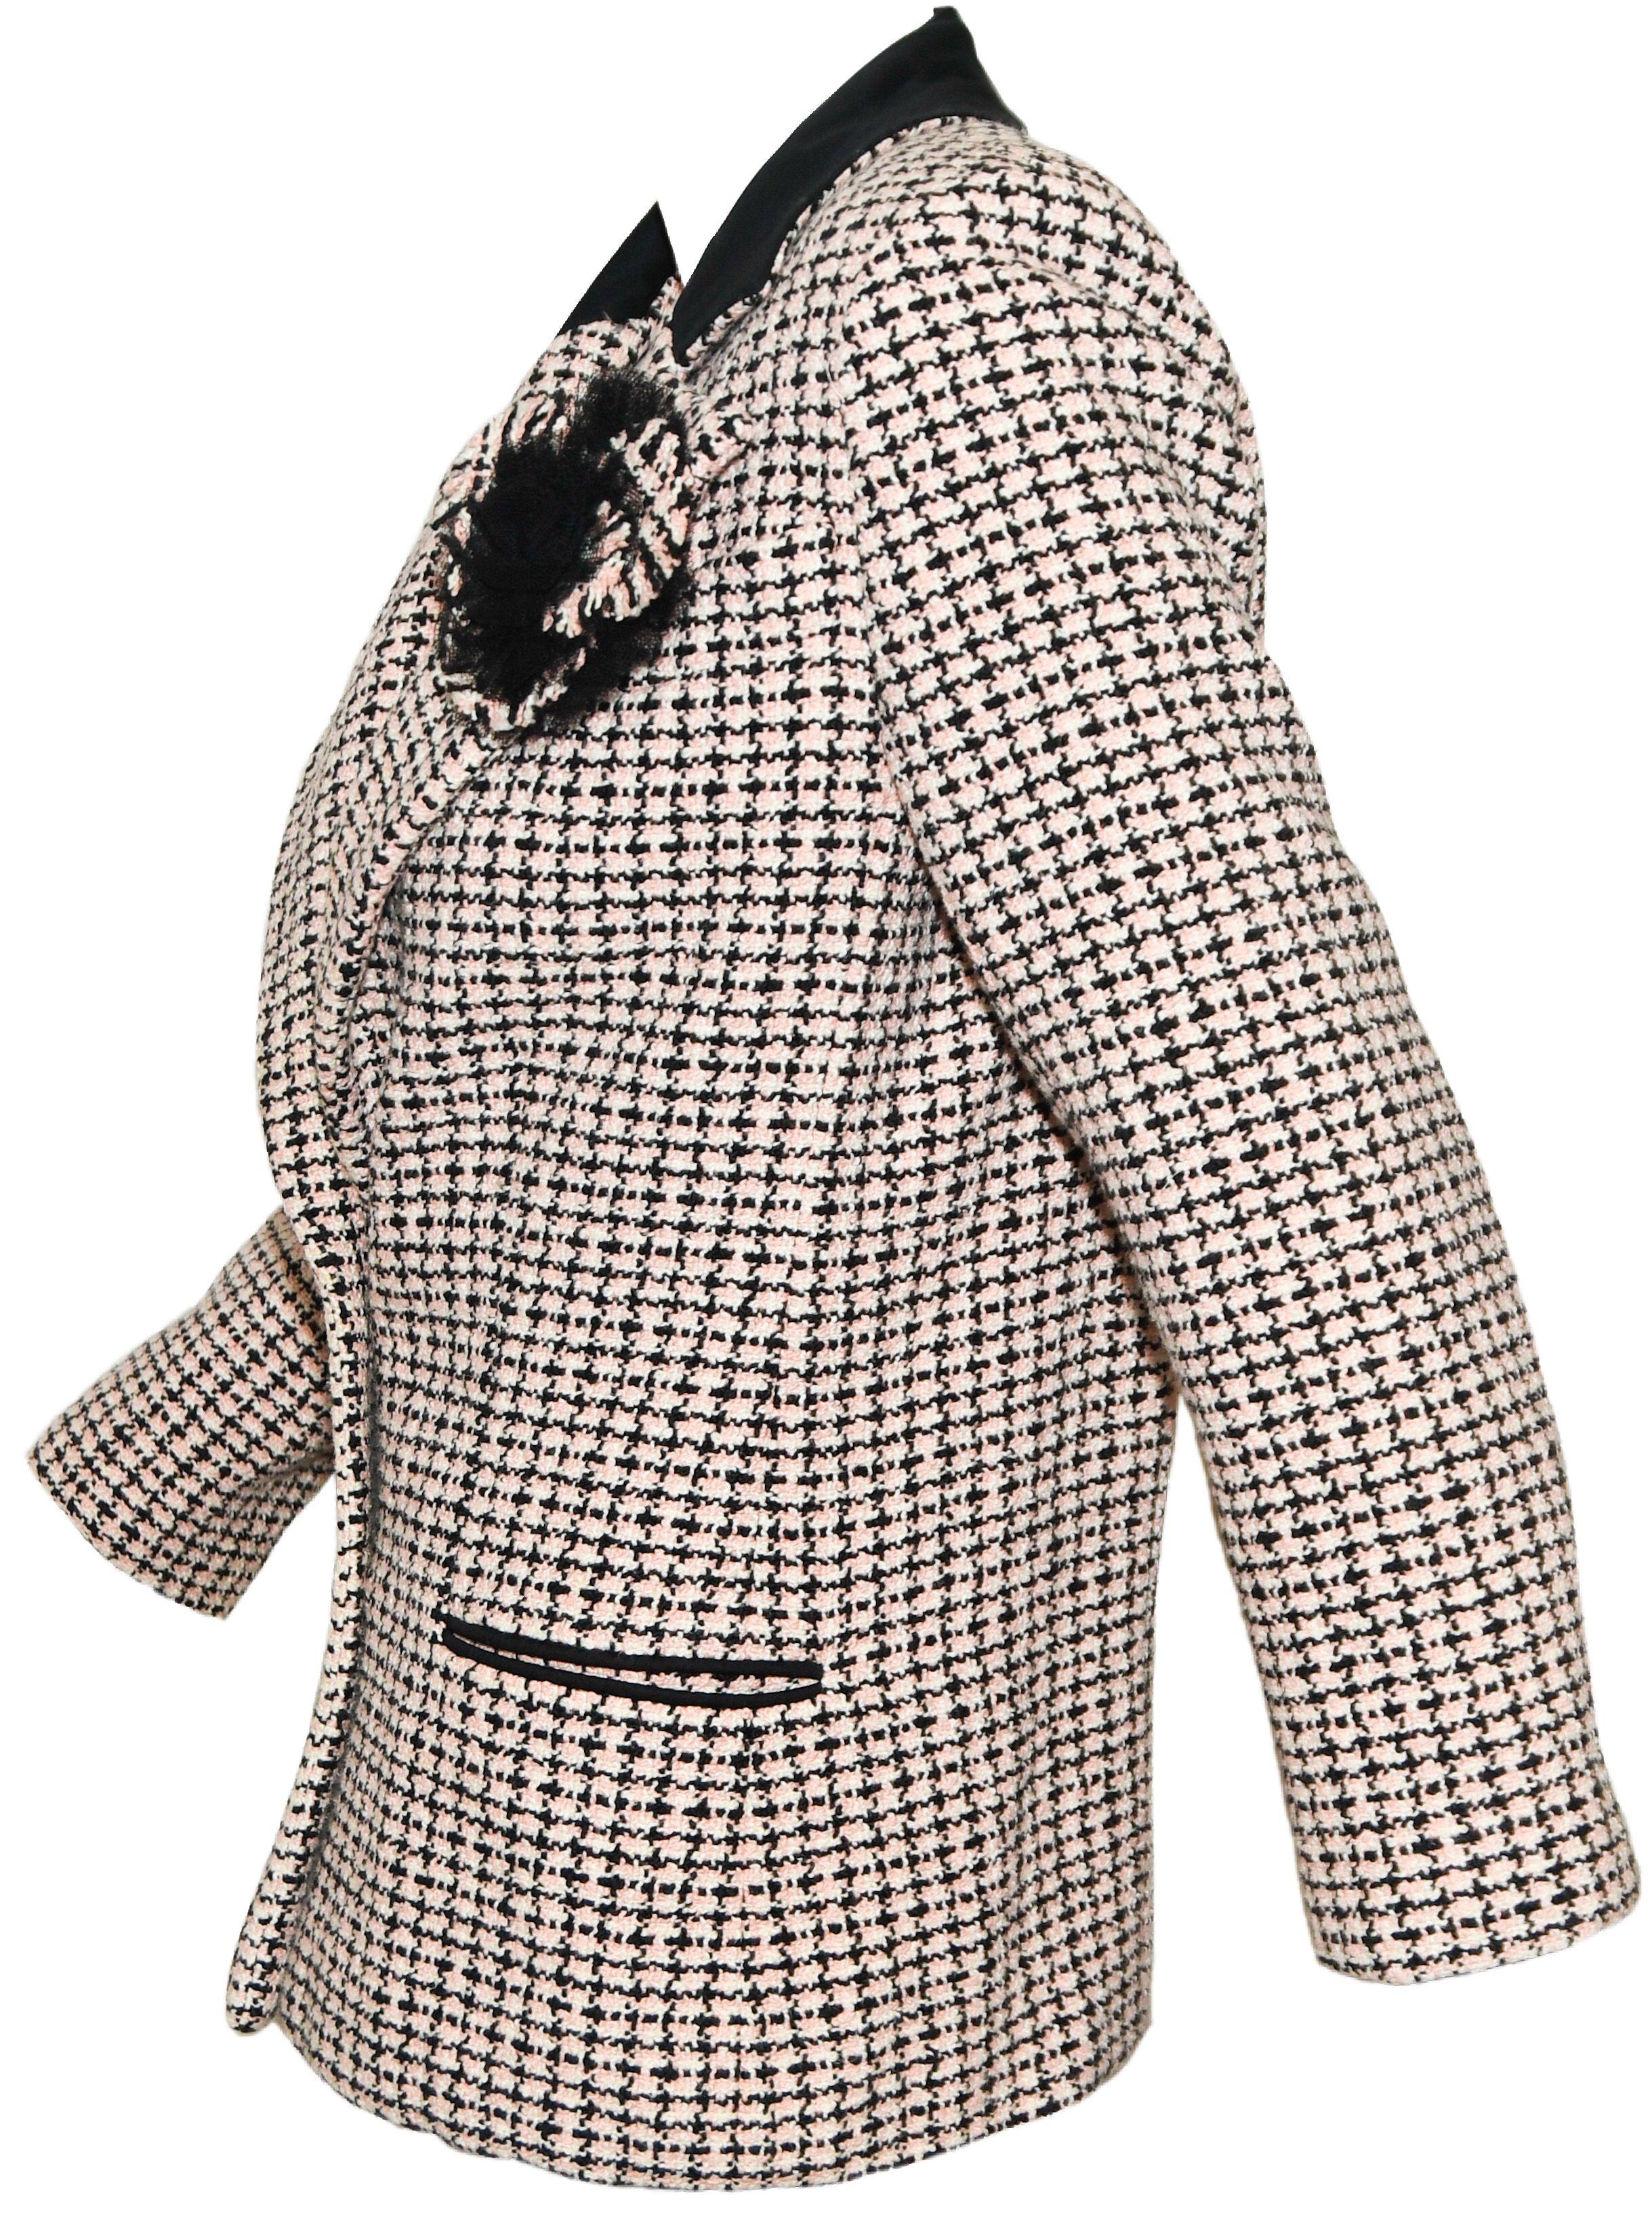 Chanel pink, black and white cotton tweed jacket is from the 2002 spring collection!  It includes a Camellia flower corsage composed of the cotton tweed fabric and black tulle, located at the lapel.   This is a 100% cotton heavier weight jacket and